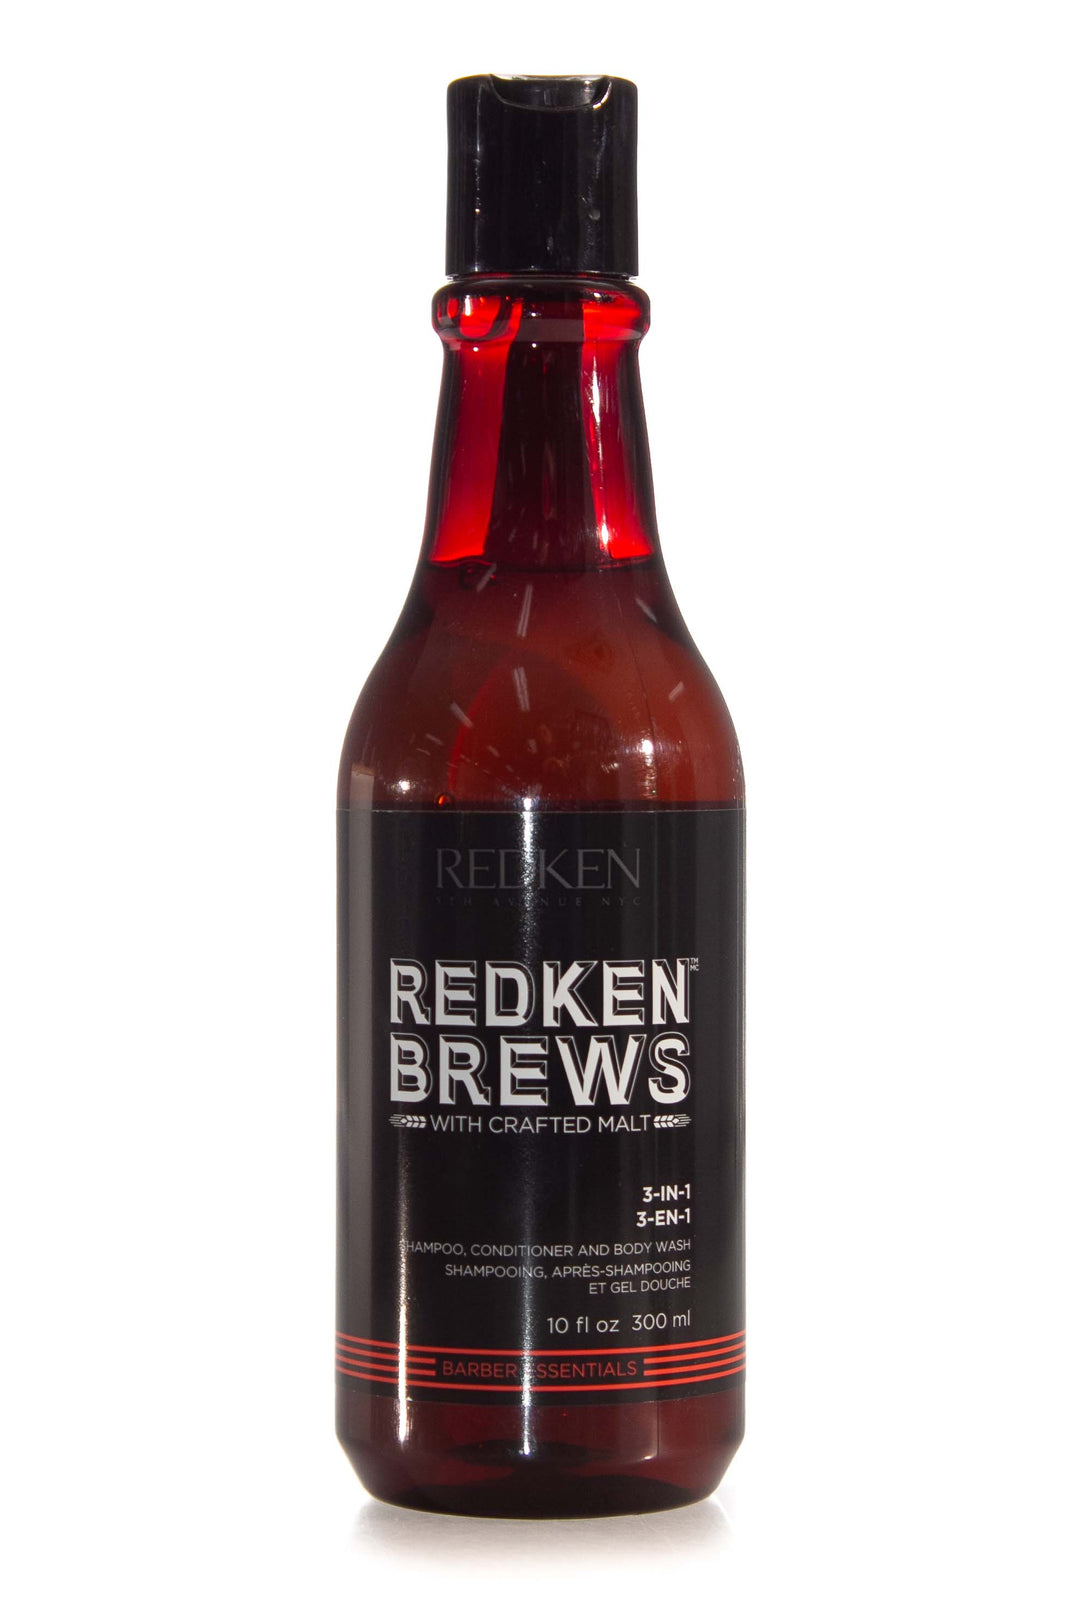 redken-brews-3-in-1-shampoo-conditioner-body-wash-300ml Cleanses and conditions hair and washes body for freshness from head to toe.